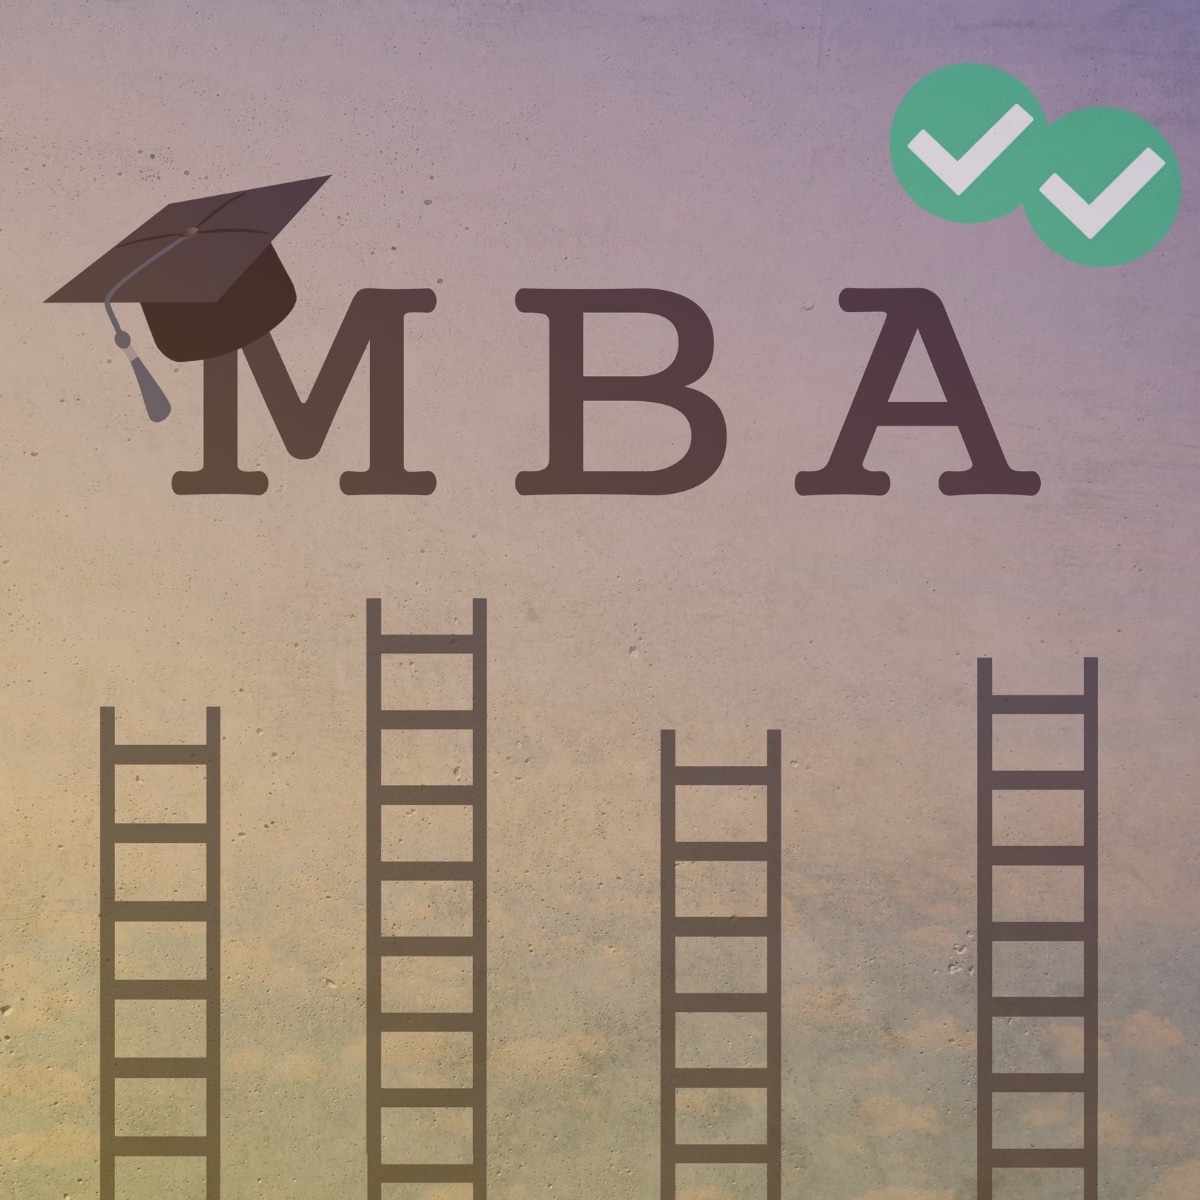 MBA written over series of ladders